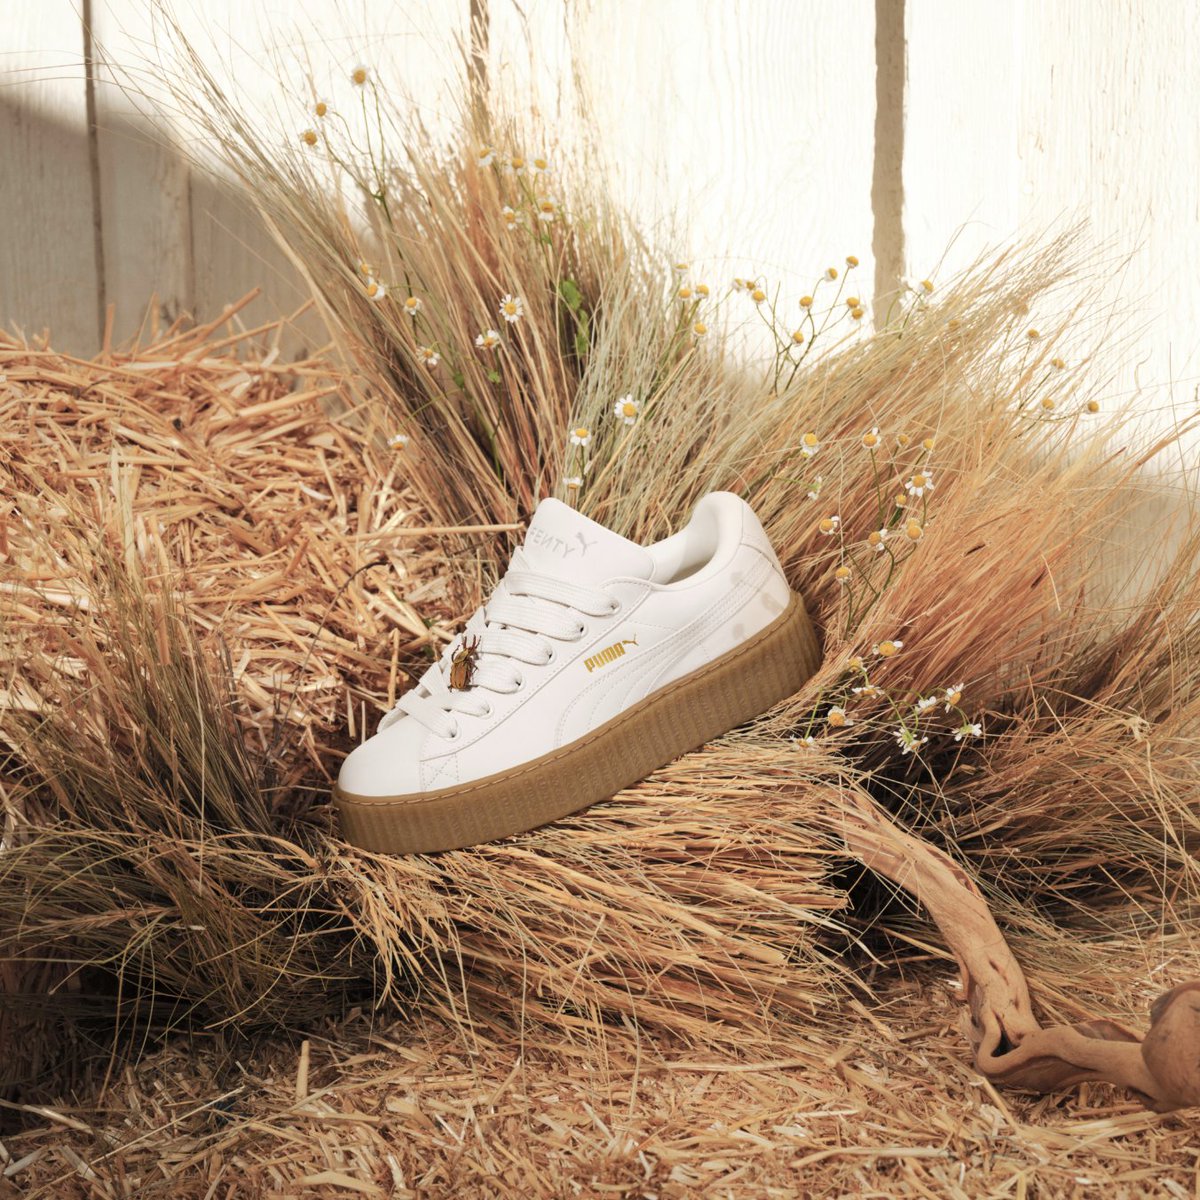 It’s all in the details. This new Creeper Phatty stands out with luxe, premium nubuck and touches of gold. The FENTY x PUMA Creeper Phatty Earth Tone will be available in women's and kids sizing on April 25th at Foot Locker.